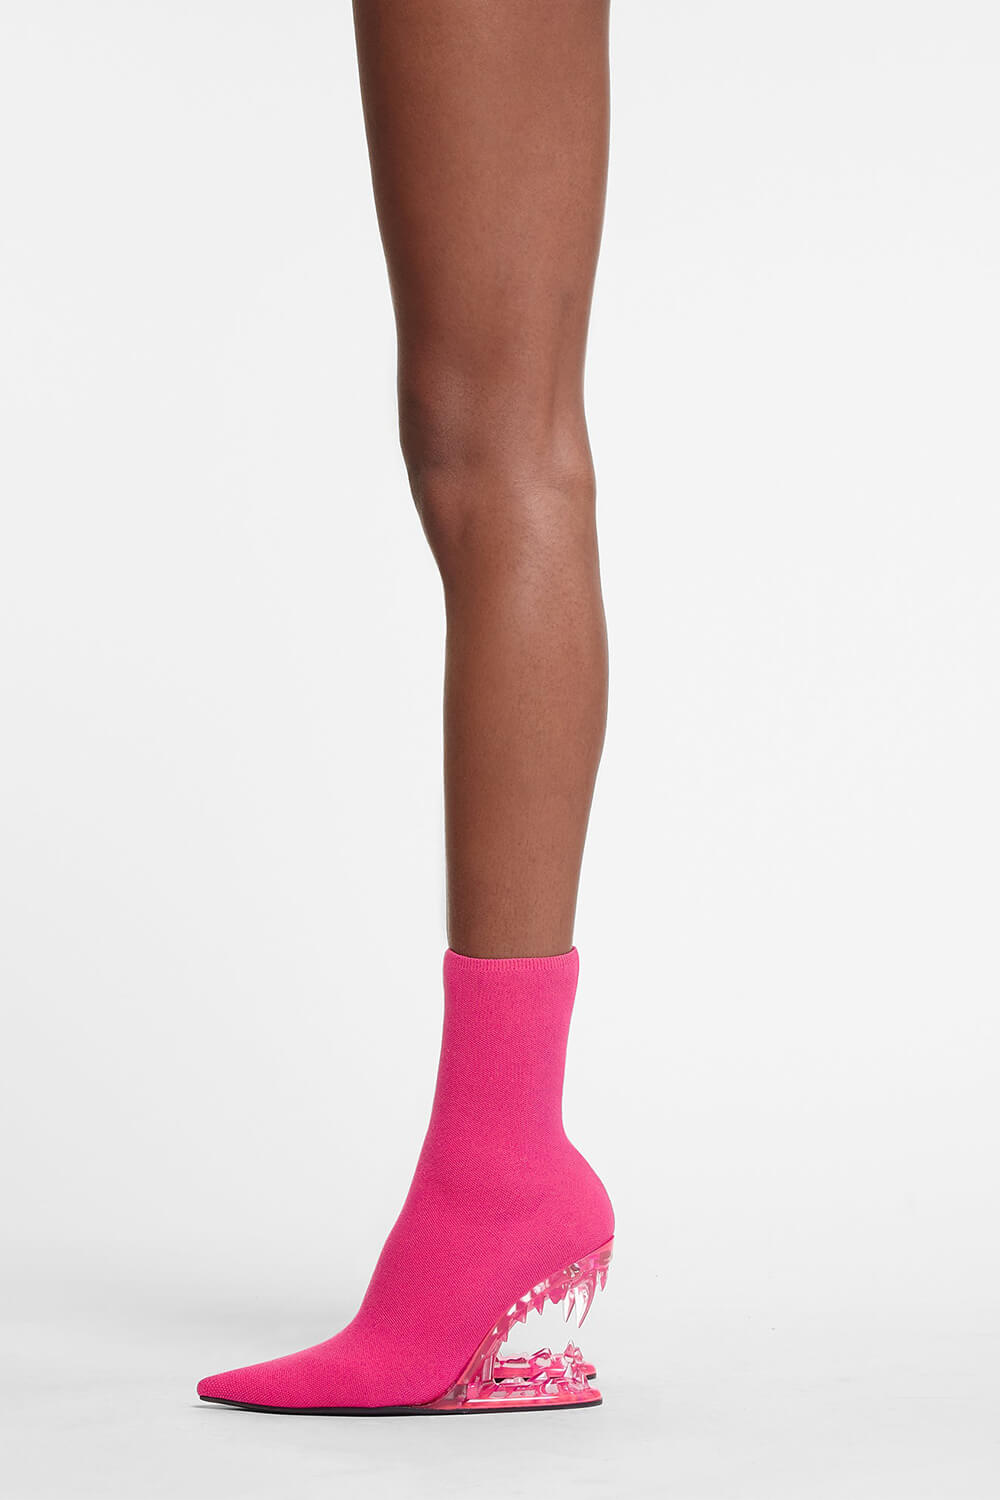 Ribbed Sock Pointed Toe Ankle Morso Heeled Boots - Hot Pink